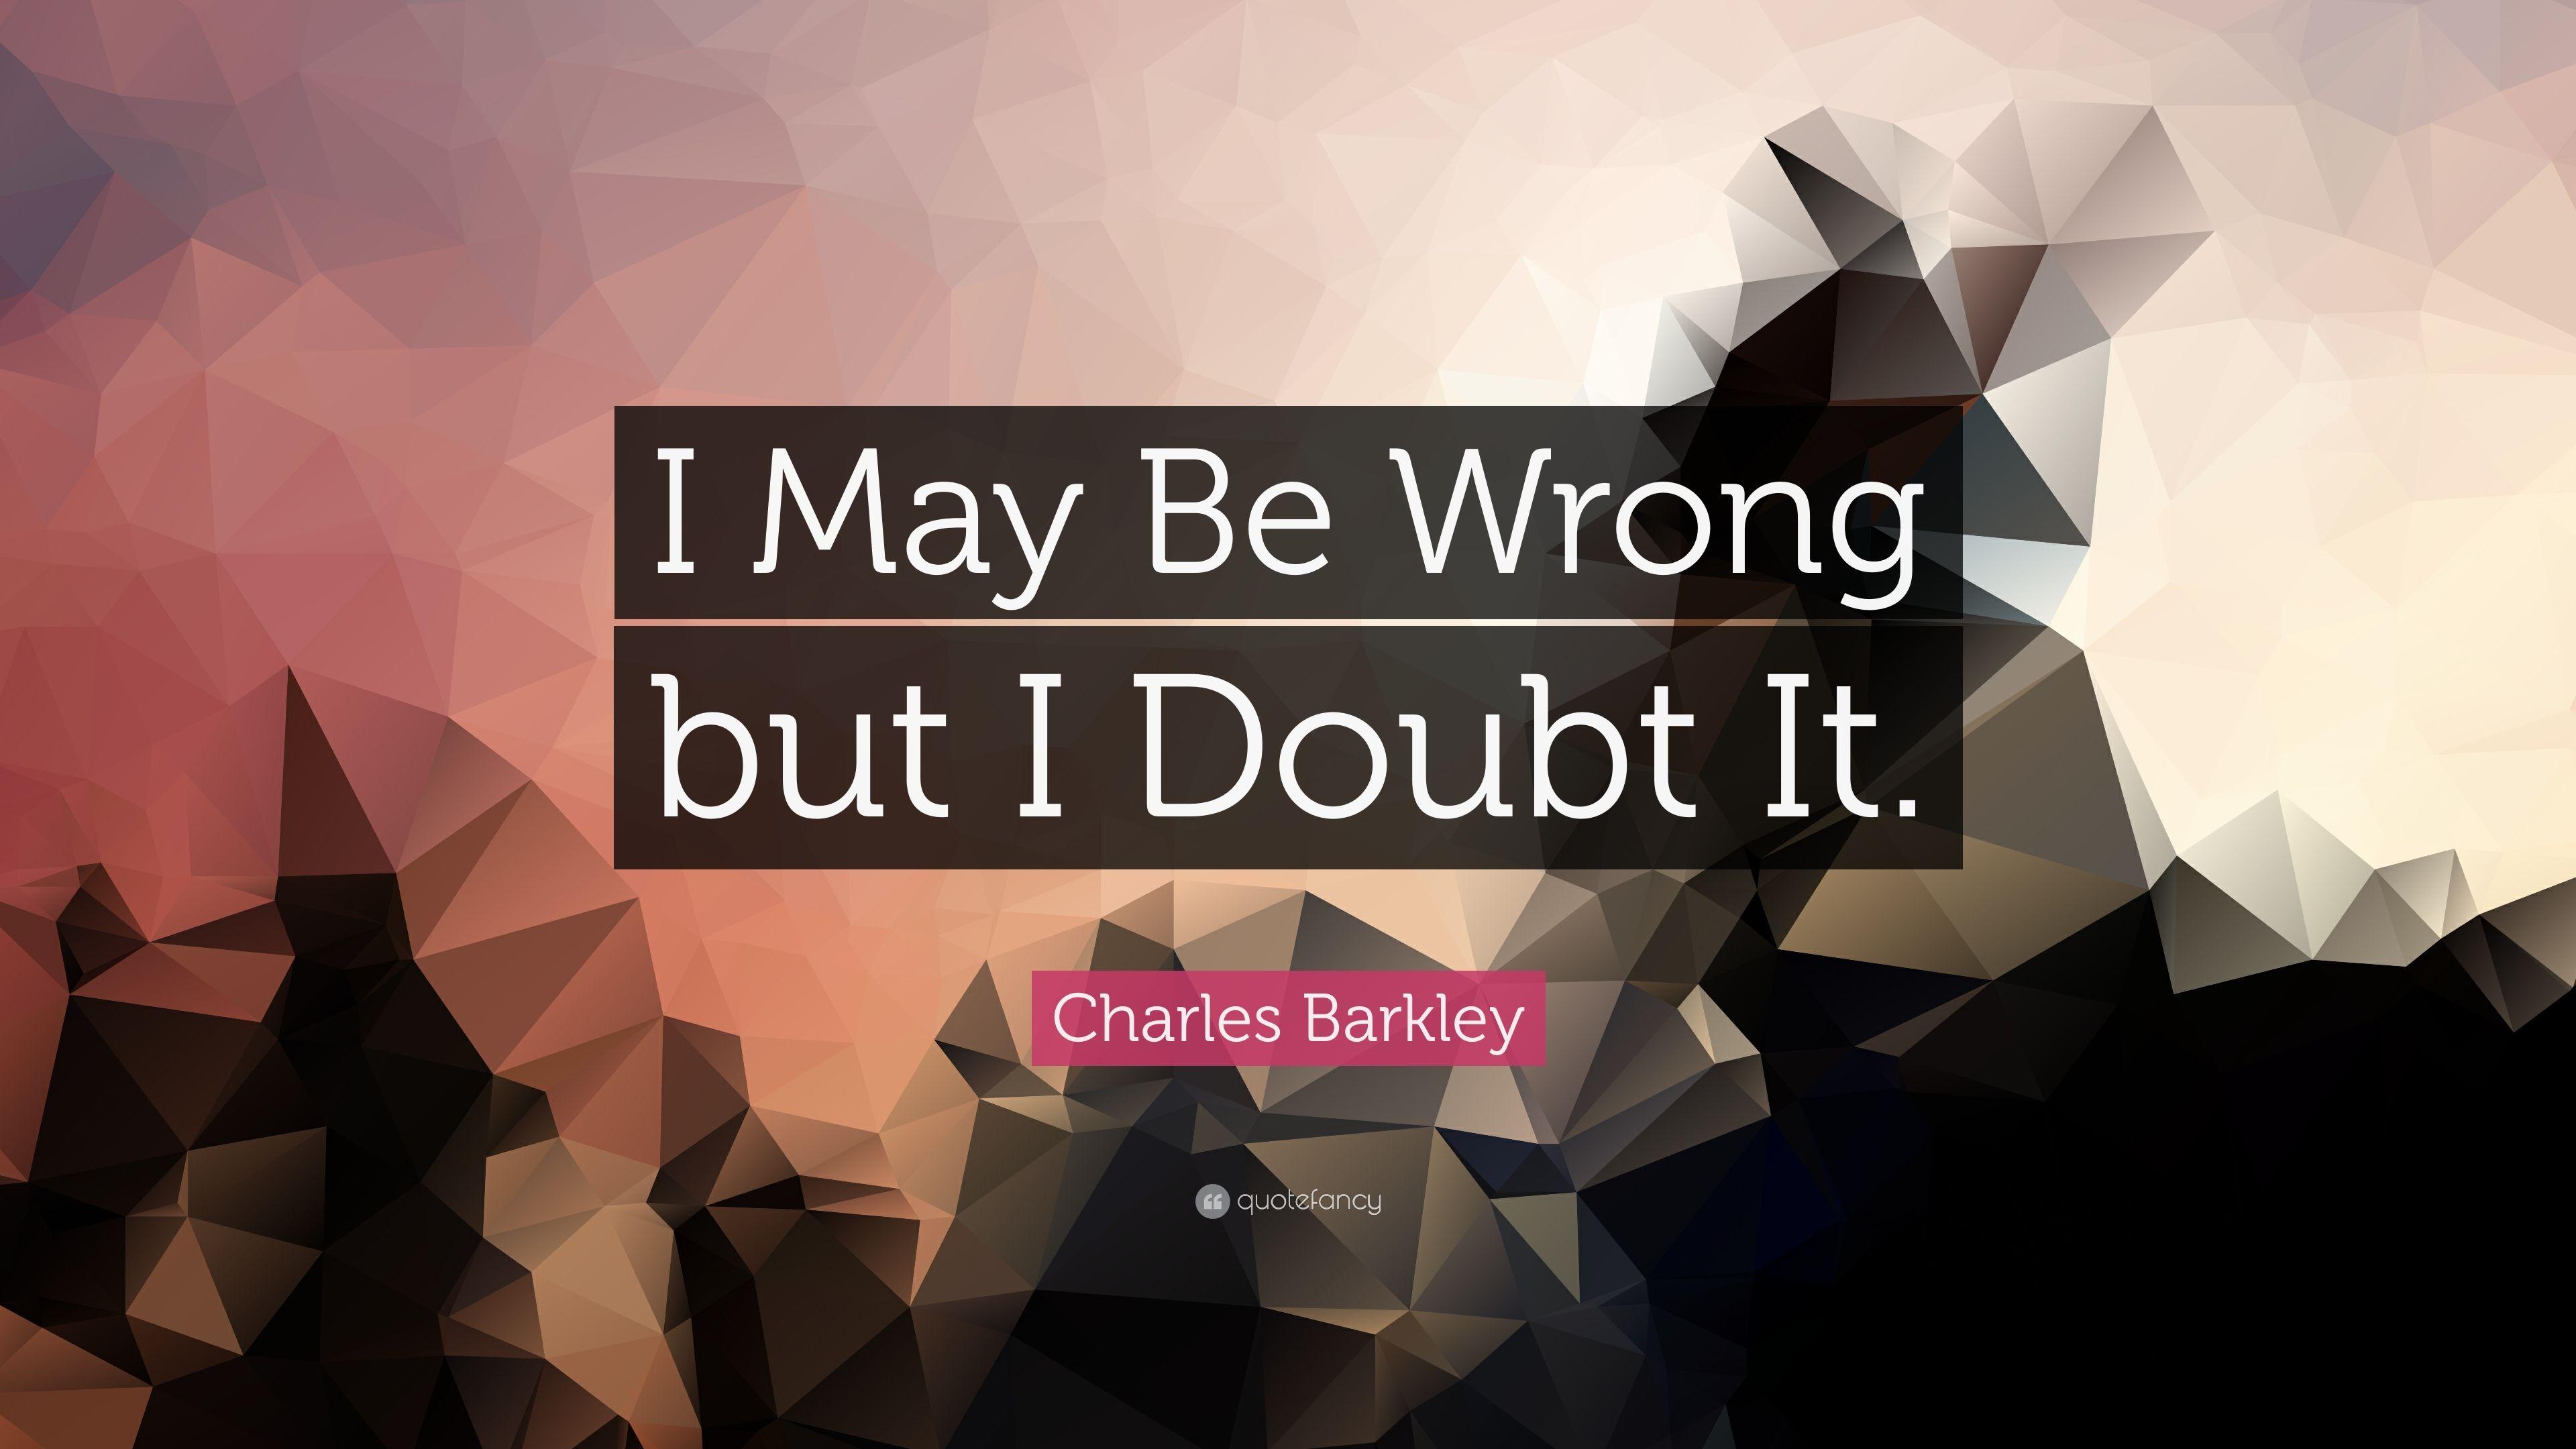 Charles Barkley Quote: “I May Be Wrong but I Doubt It.” 9